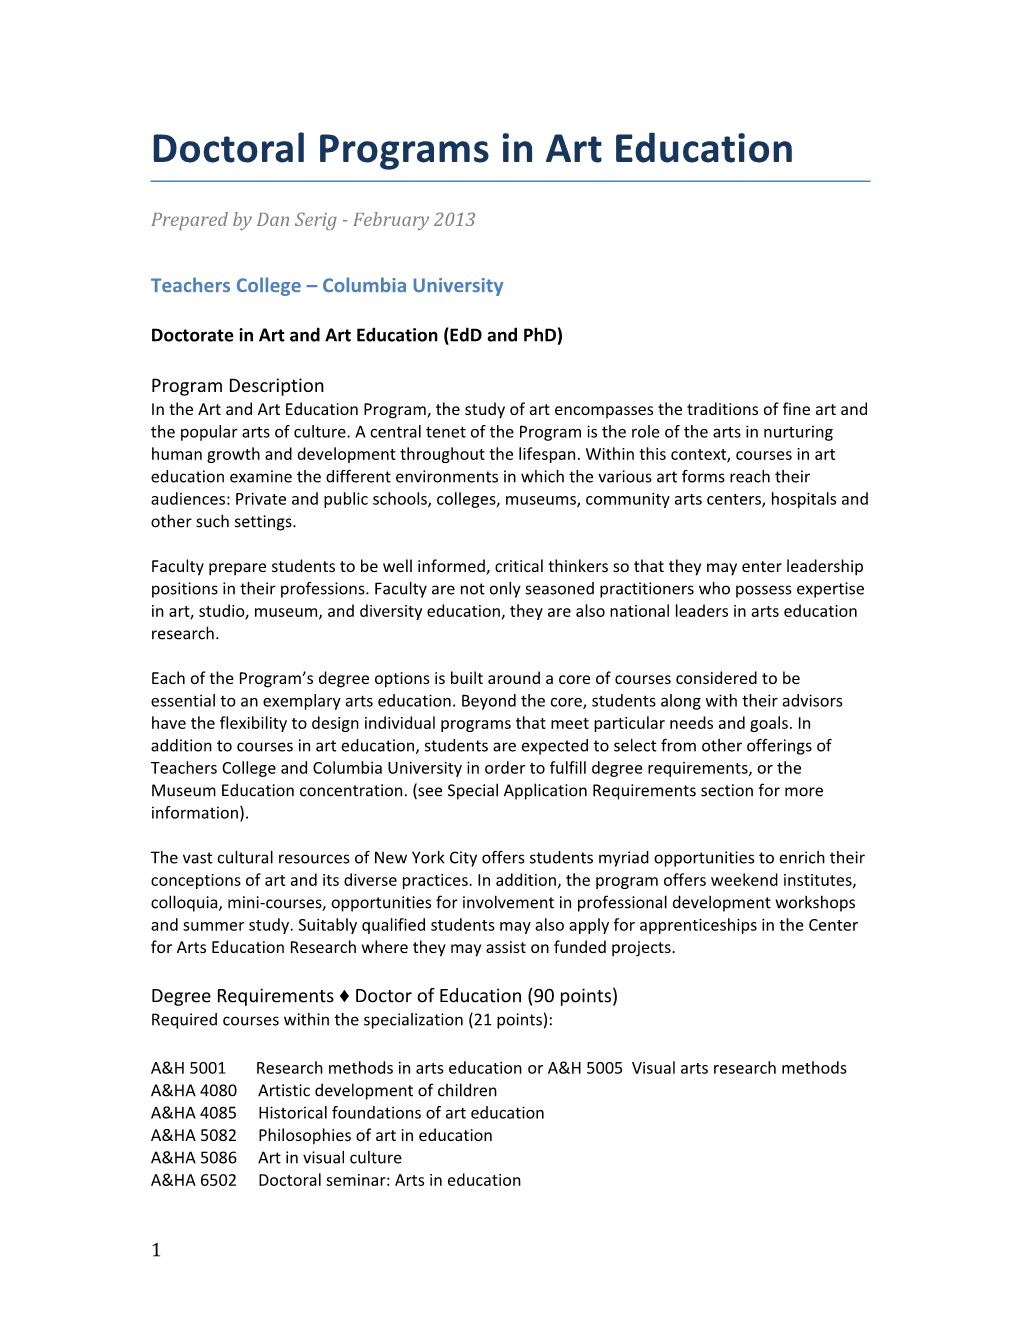 Doctorate in Art and Art Education (Edd and Phd)